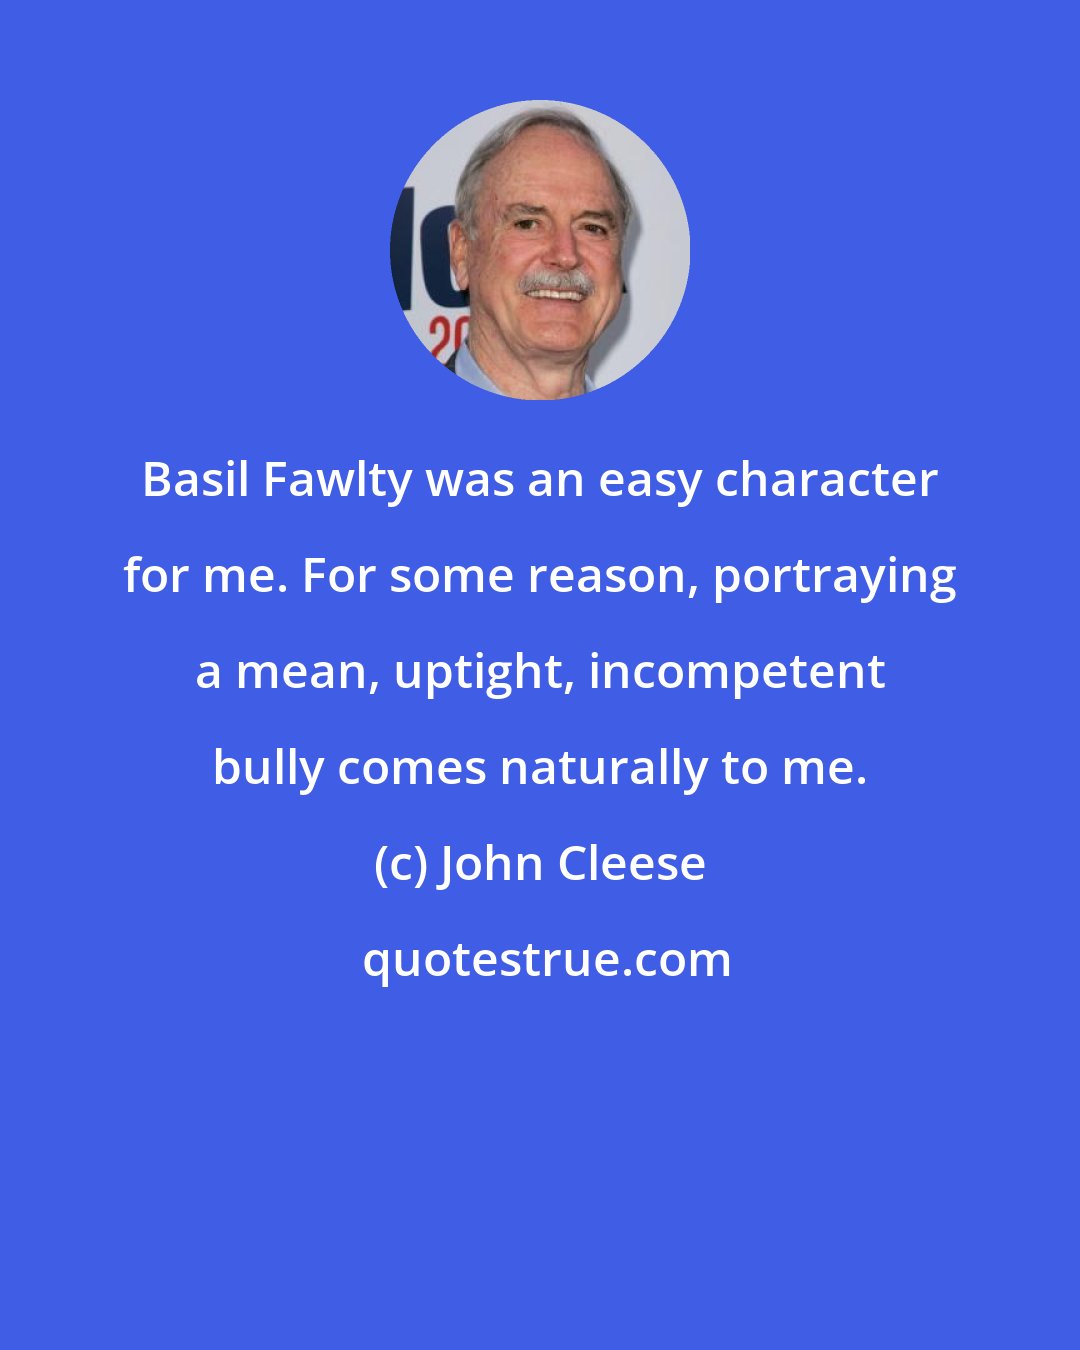 John Cleese: Basil Fawlty was an easy character for me. For some reason, portraying a mean, uptight, incompetent bully comes naturally to me.